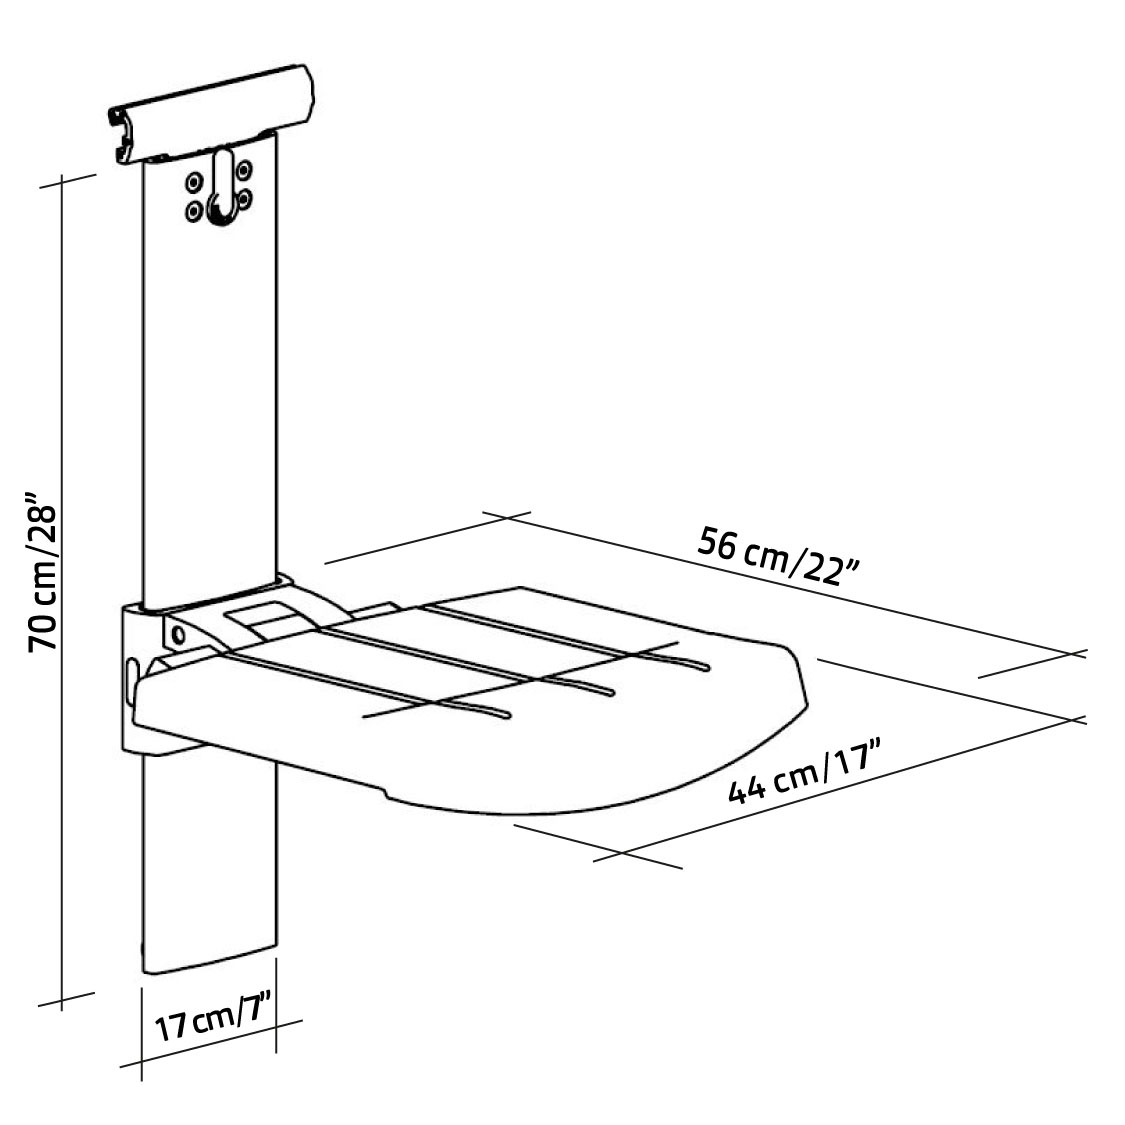 31-141-xx-shower-seat-for-horizontal-track-height-and-sideways-adjustable-diagram